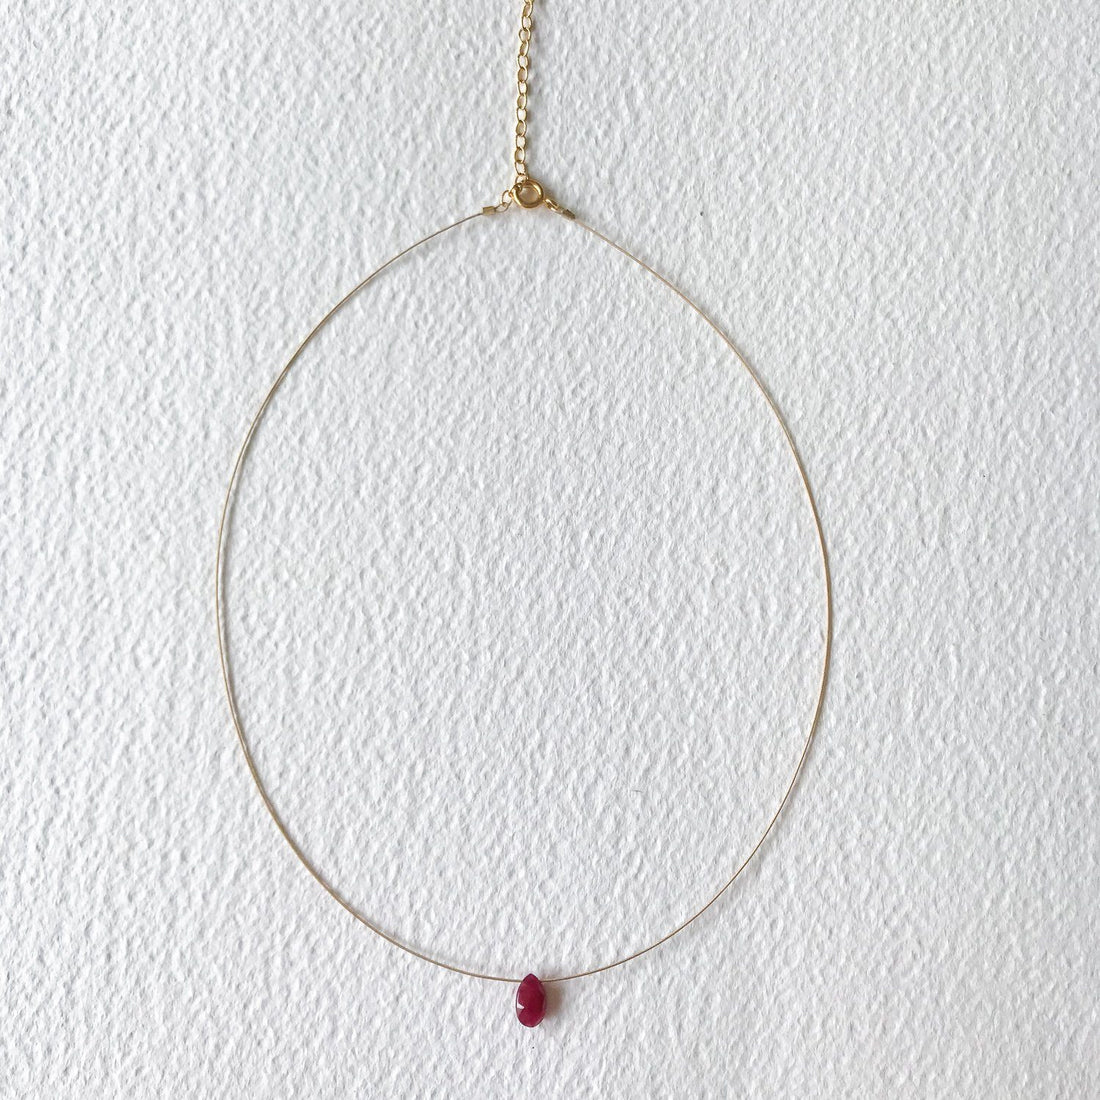 Luna Ruby and Gold Necklace - Sayulita Sol Jewelry